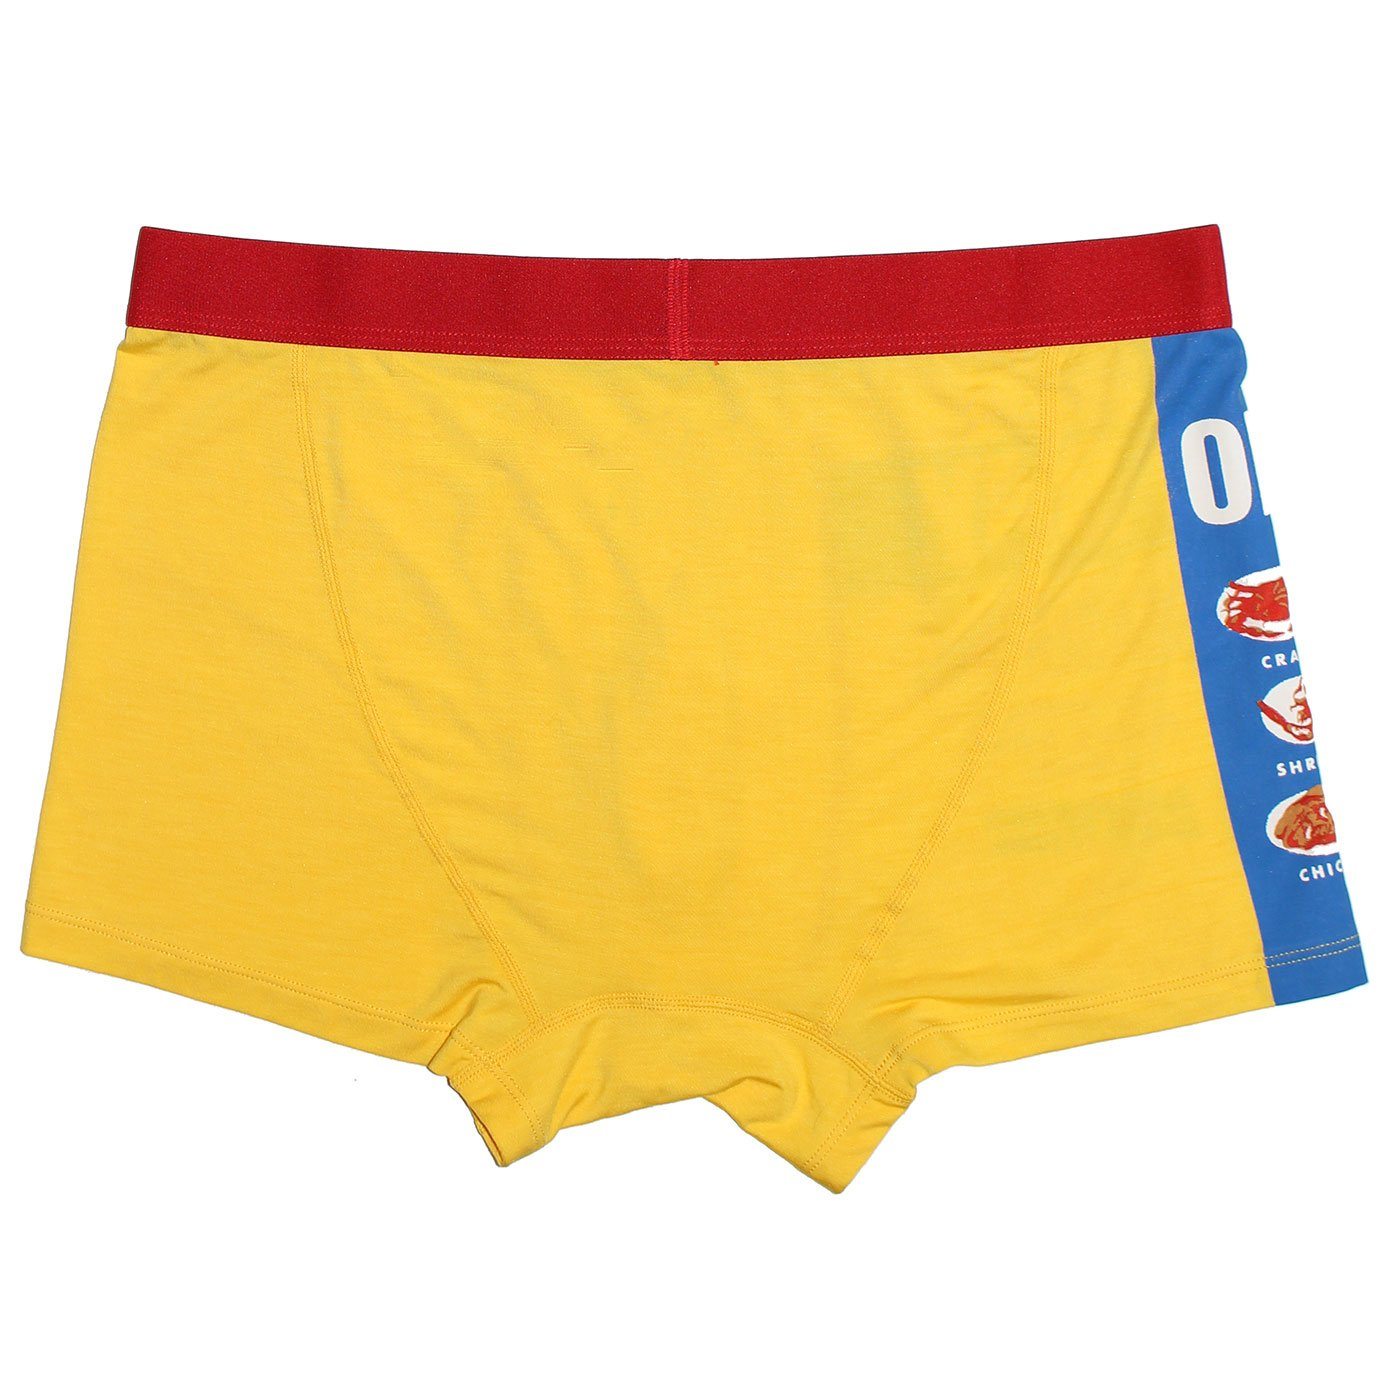 Old Bay Can / Boxer Briefs - Route One Apparel